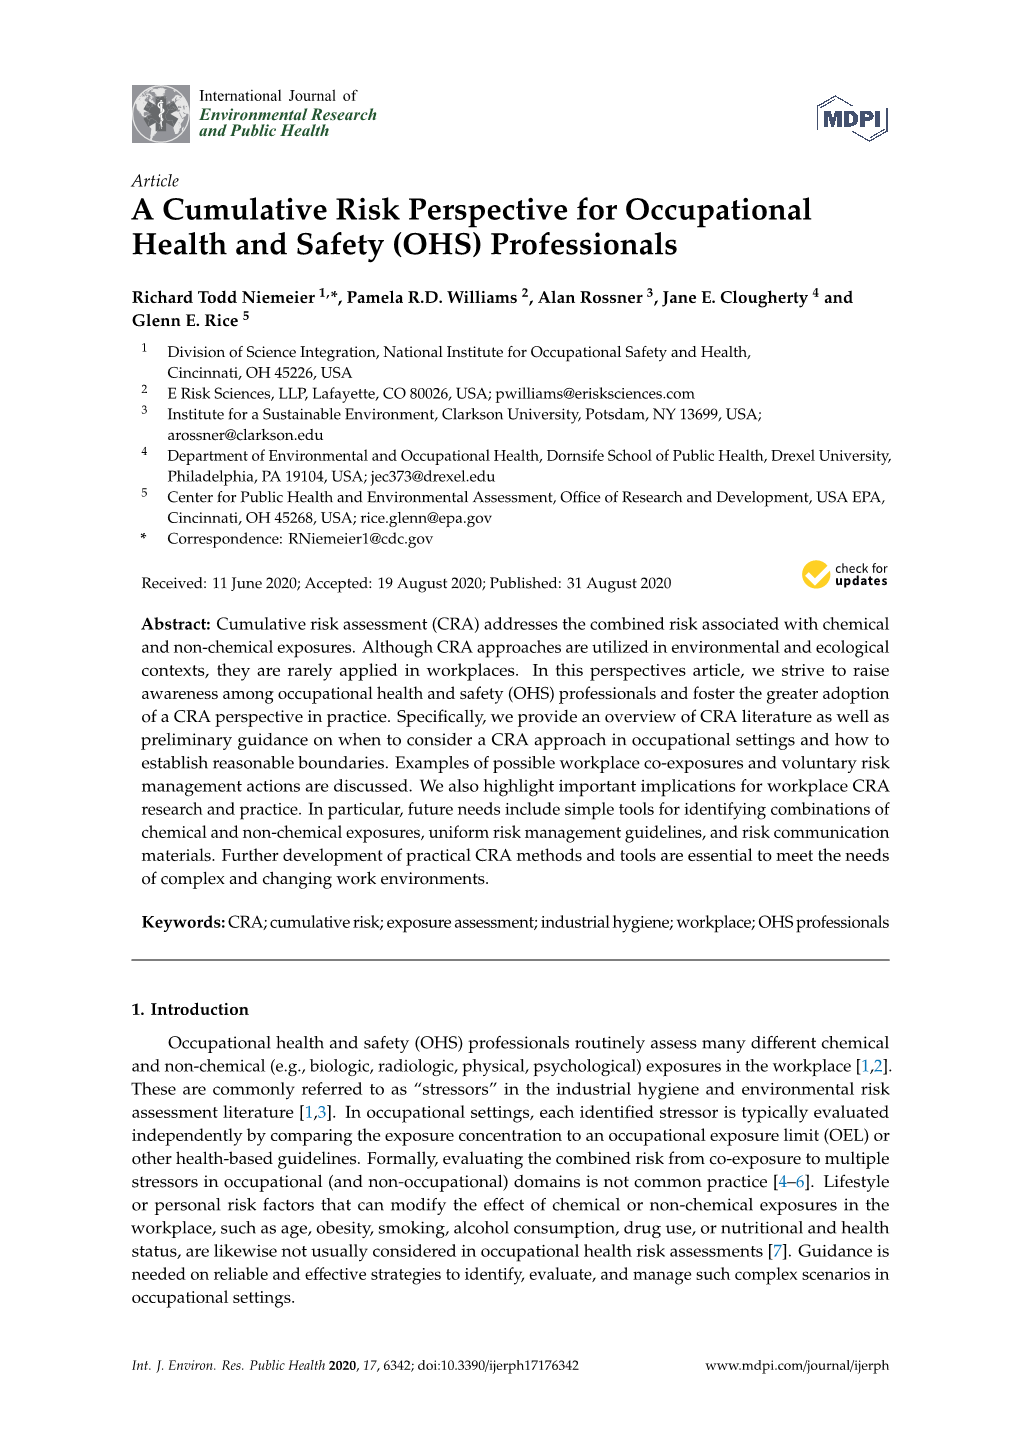 A Cumulative Risk Perspective for Occupational Health and Safety (OHS) Professionals